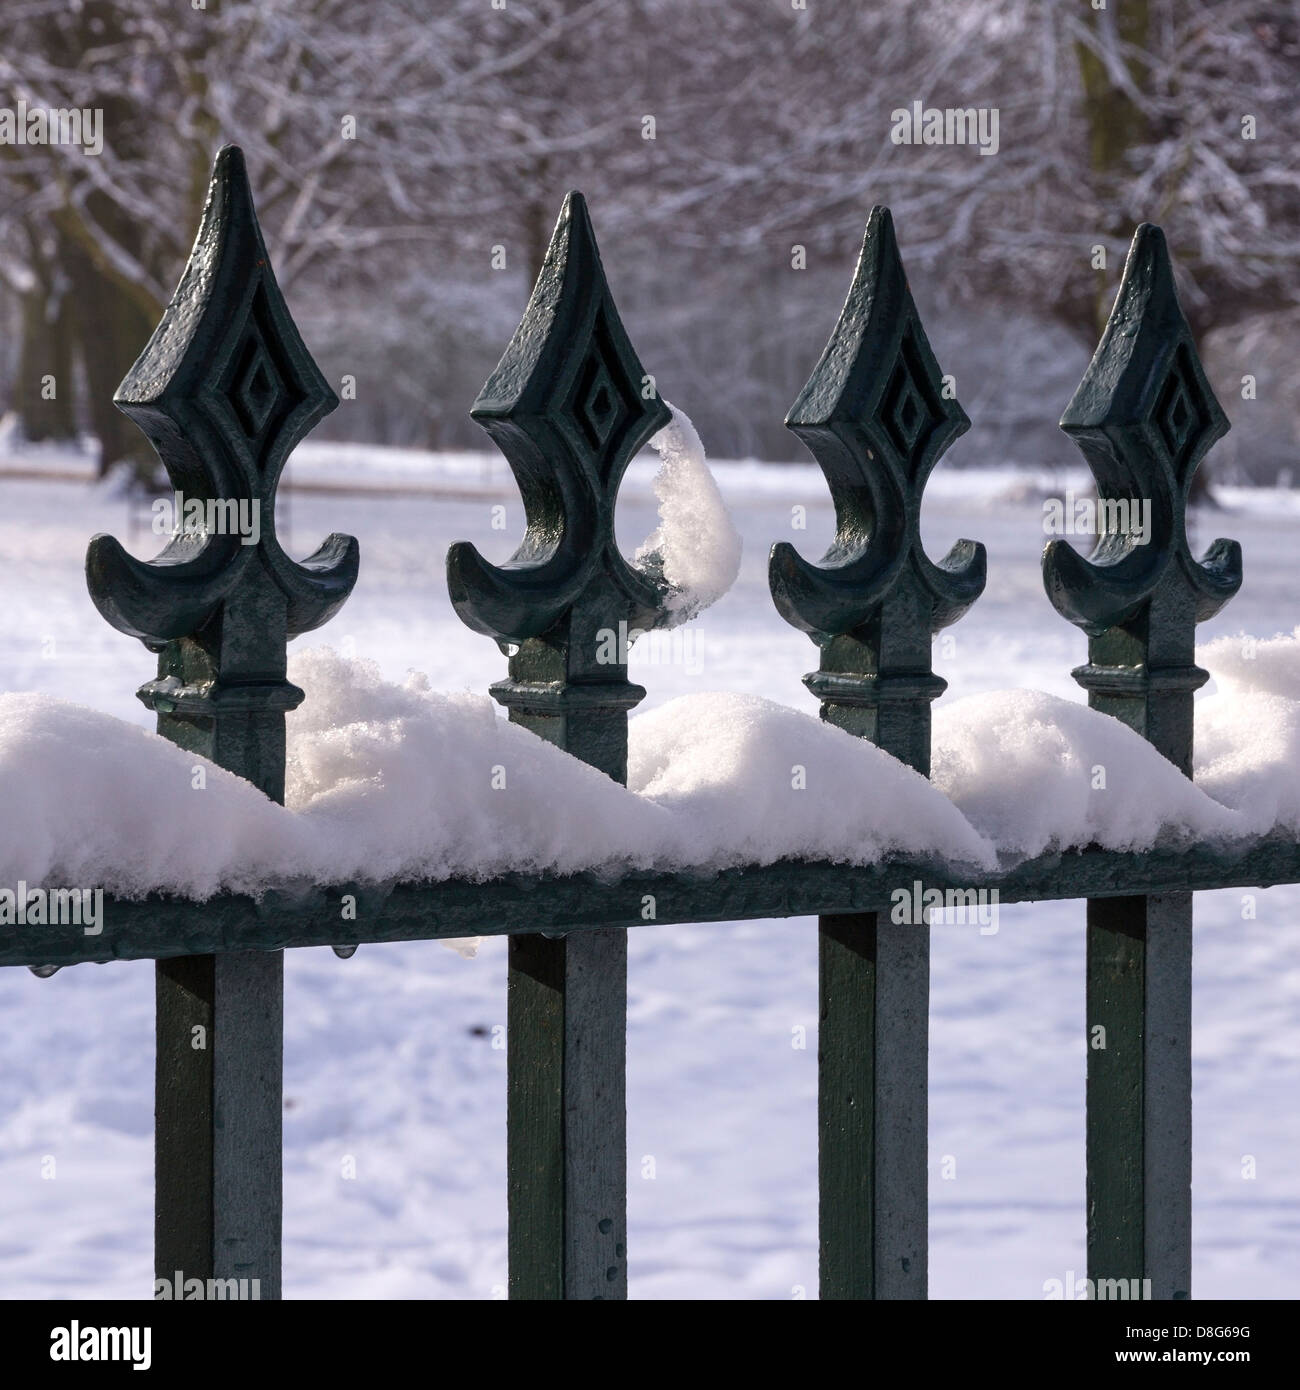 Snowy iron metal fence railings with finials, UK Stock Photo